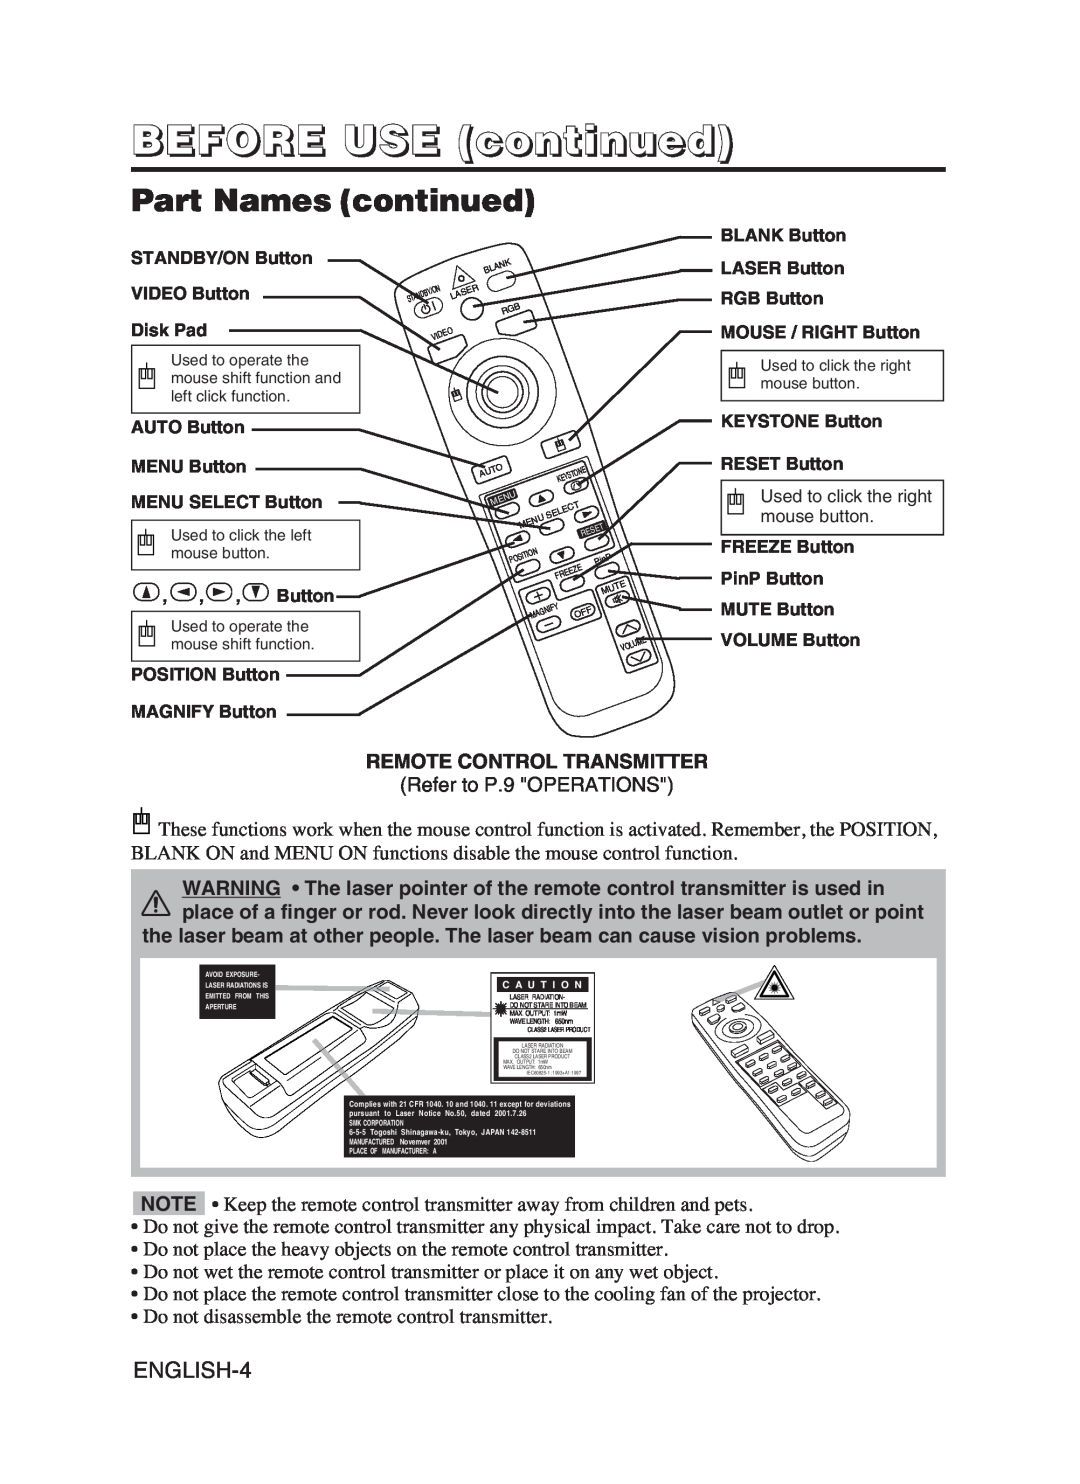 Hitachi CP-SX5600W user manual Part Names continued, BEFORE USE continued, ENGLISH-4 